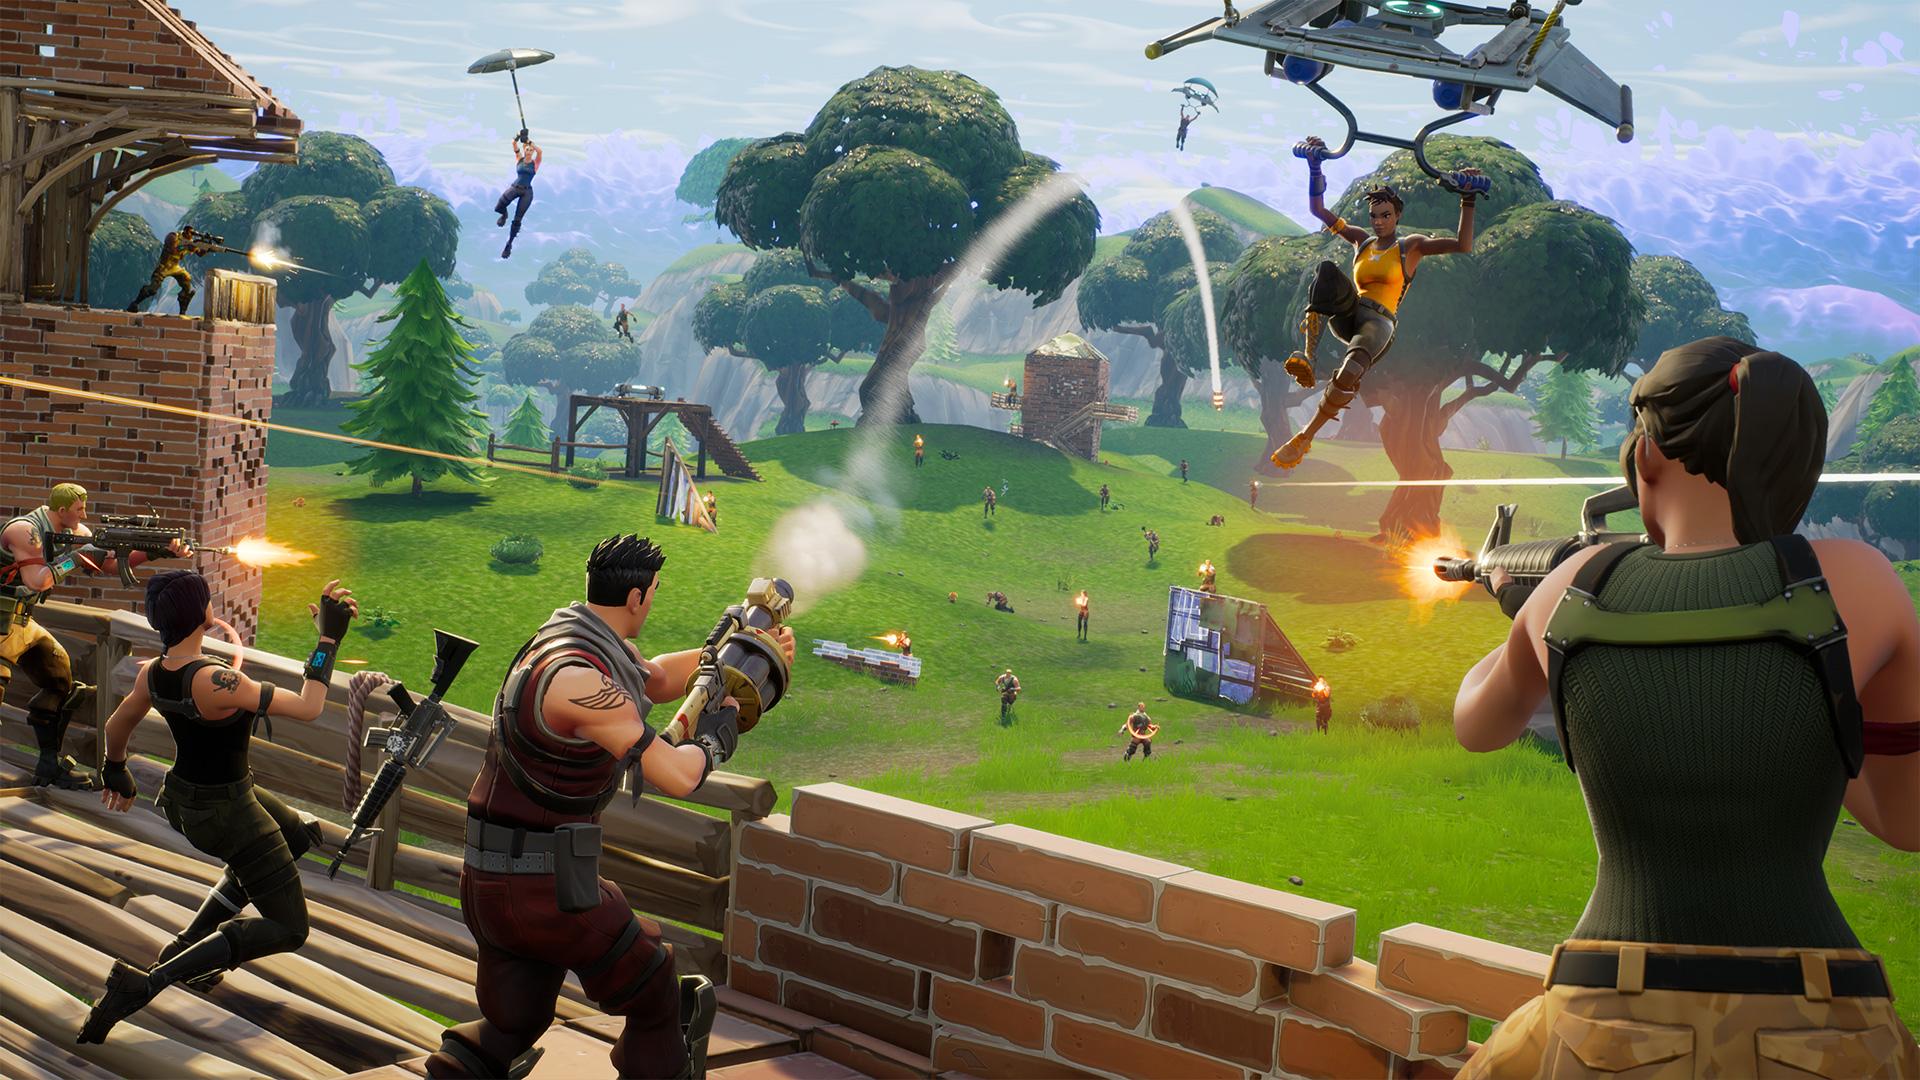 Fortnite On Switch No Longer In Ps4 Xbox One Pool For Cross Play - fortnite became the first major game last year to enable cross platform play across all platforms it was on when it did so it put ps4 xbox one